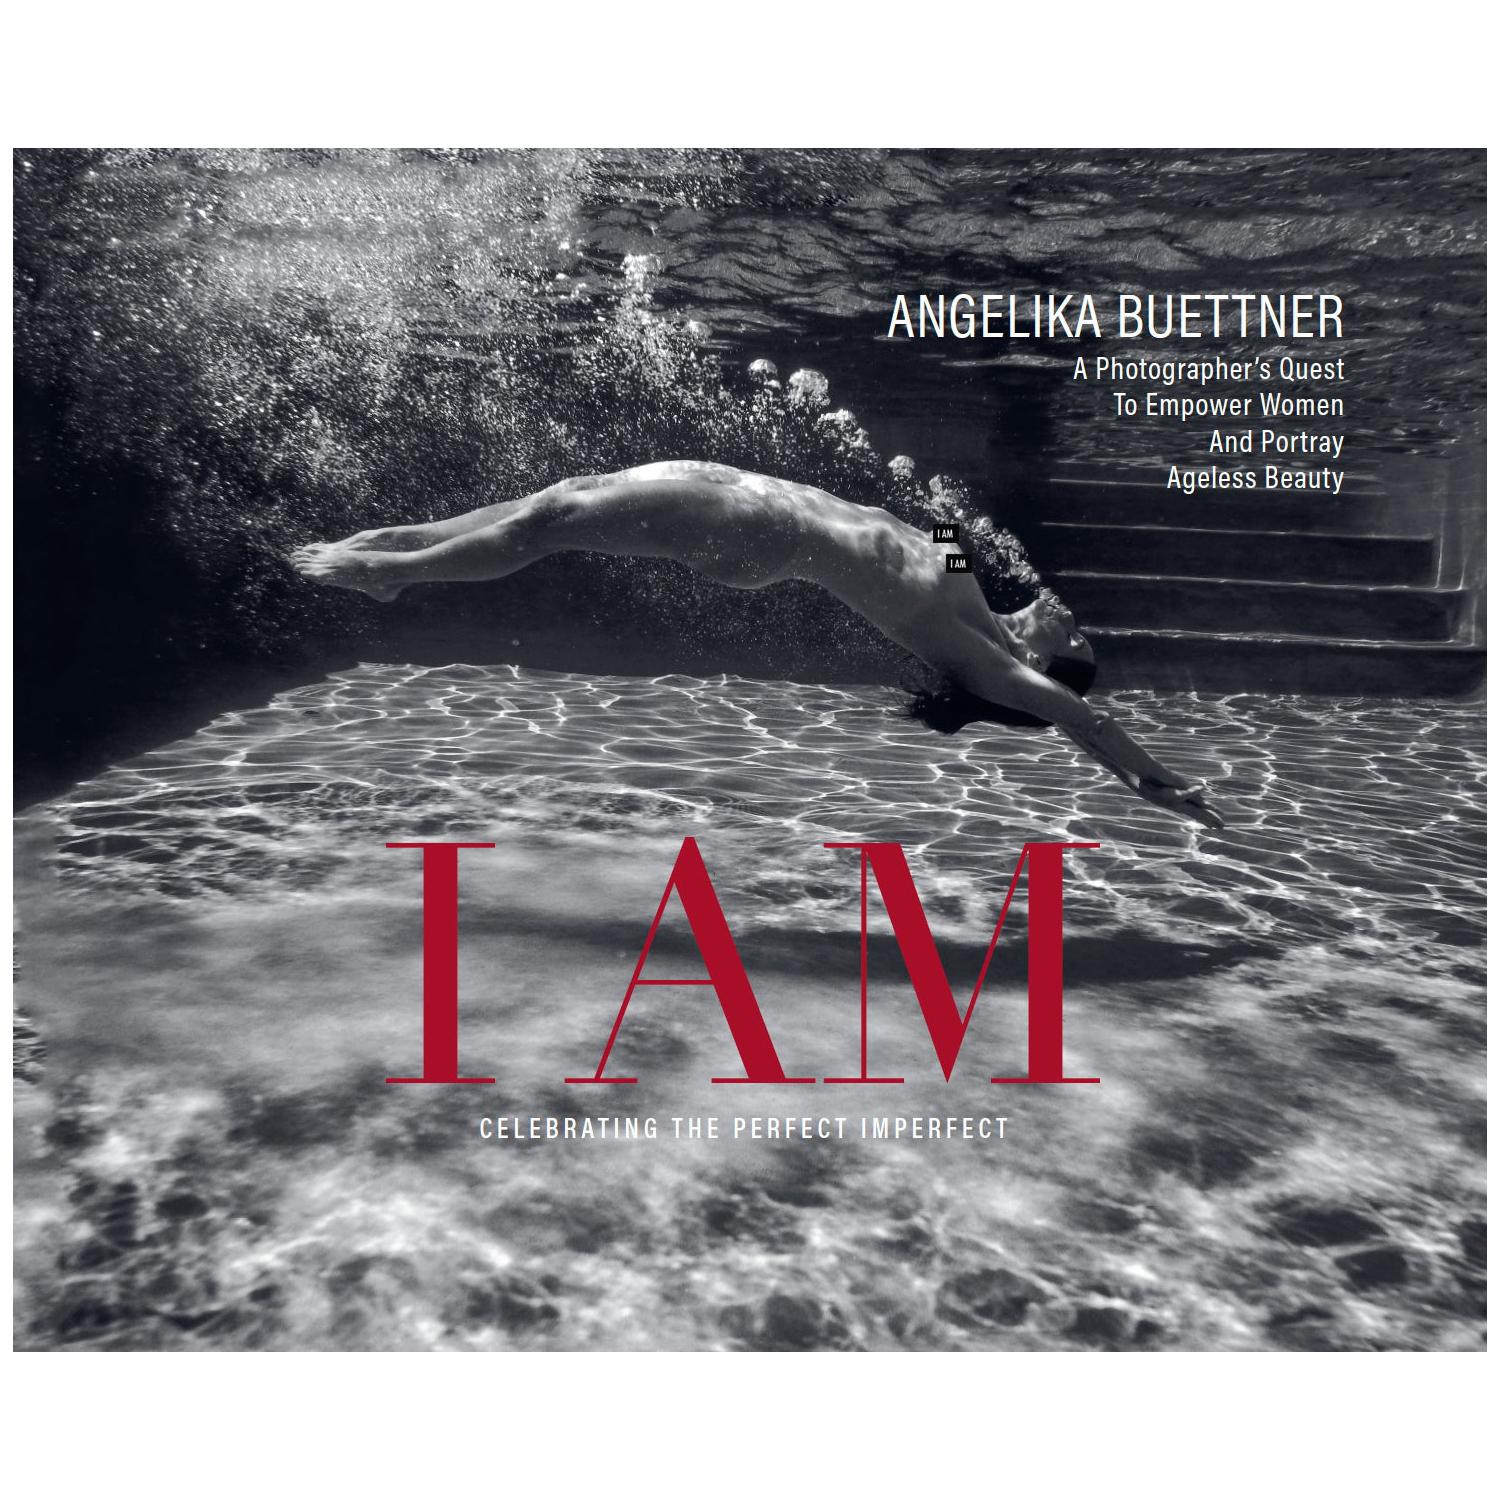 Angelika Buettner, "I AM", a Quest to Empower Women and Portray Ageless Beauty For Sale